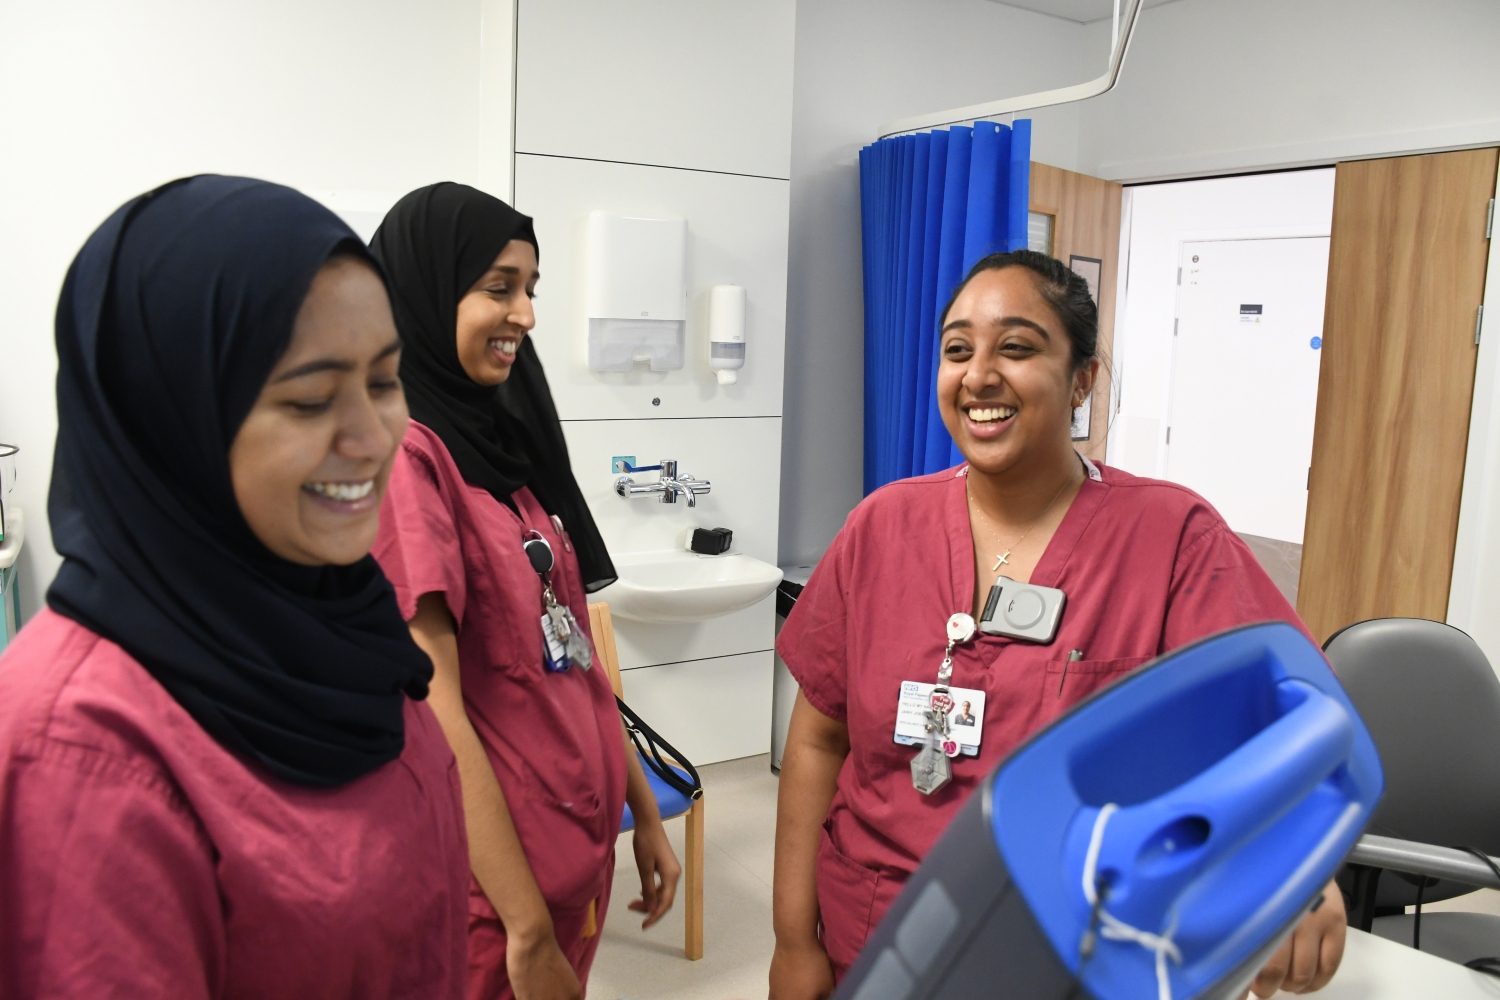 Three people in raspberry coloured scrubs laughing and smiling